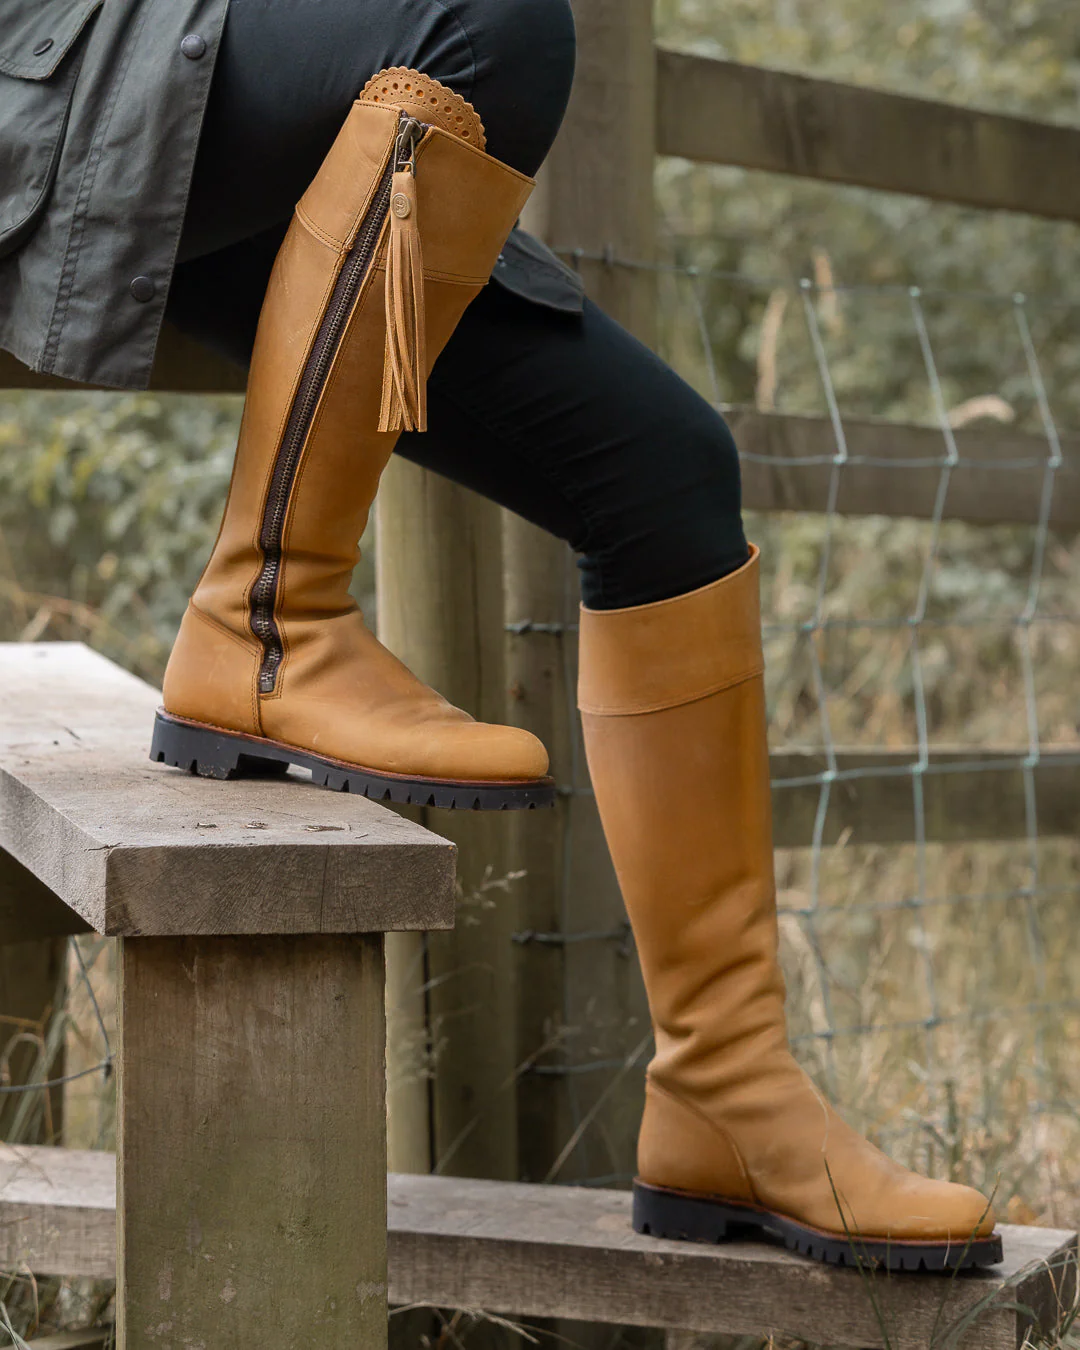 “Boot Trends 101: Staying Fashion-Forward in Every Season”